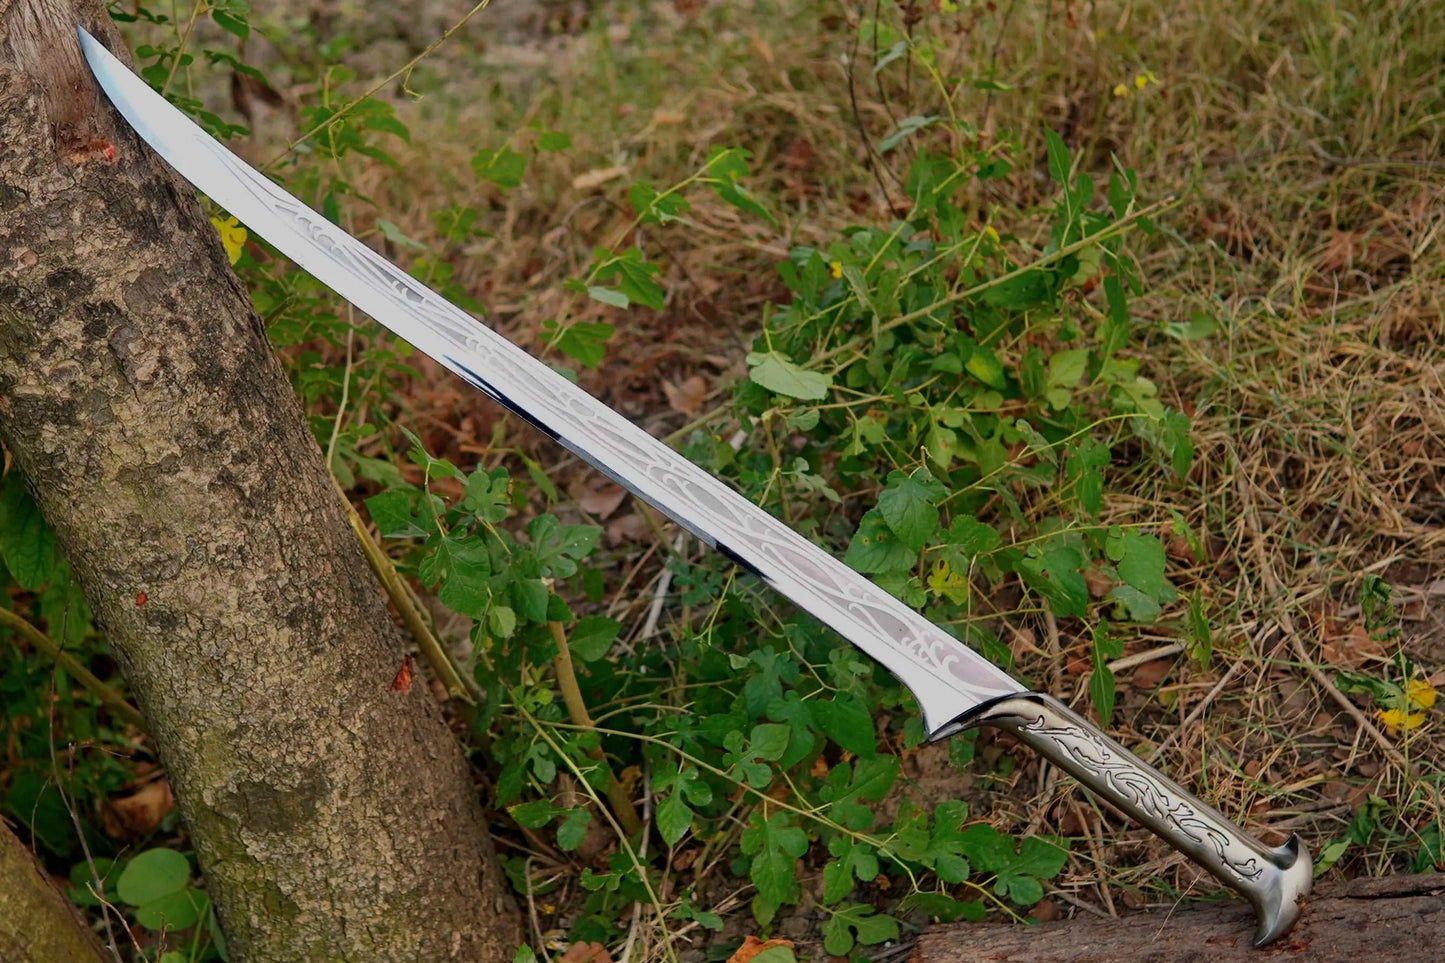 Thranduil's Elven Sword from The Hobbit: A Majestic Blade of Middle-earth